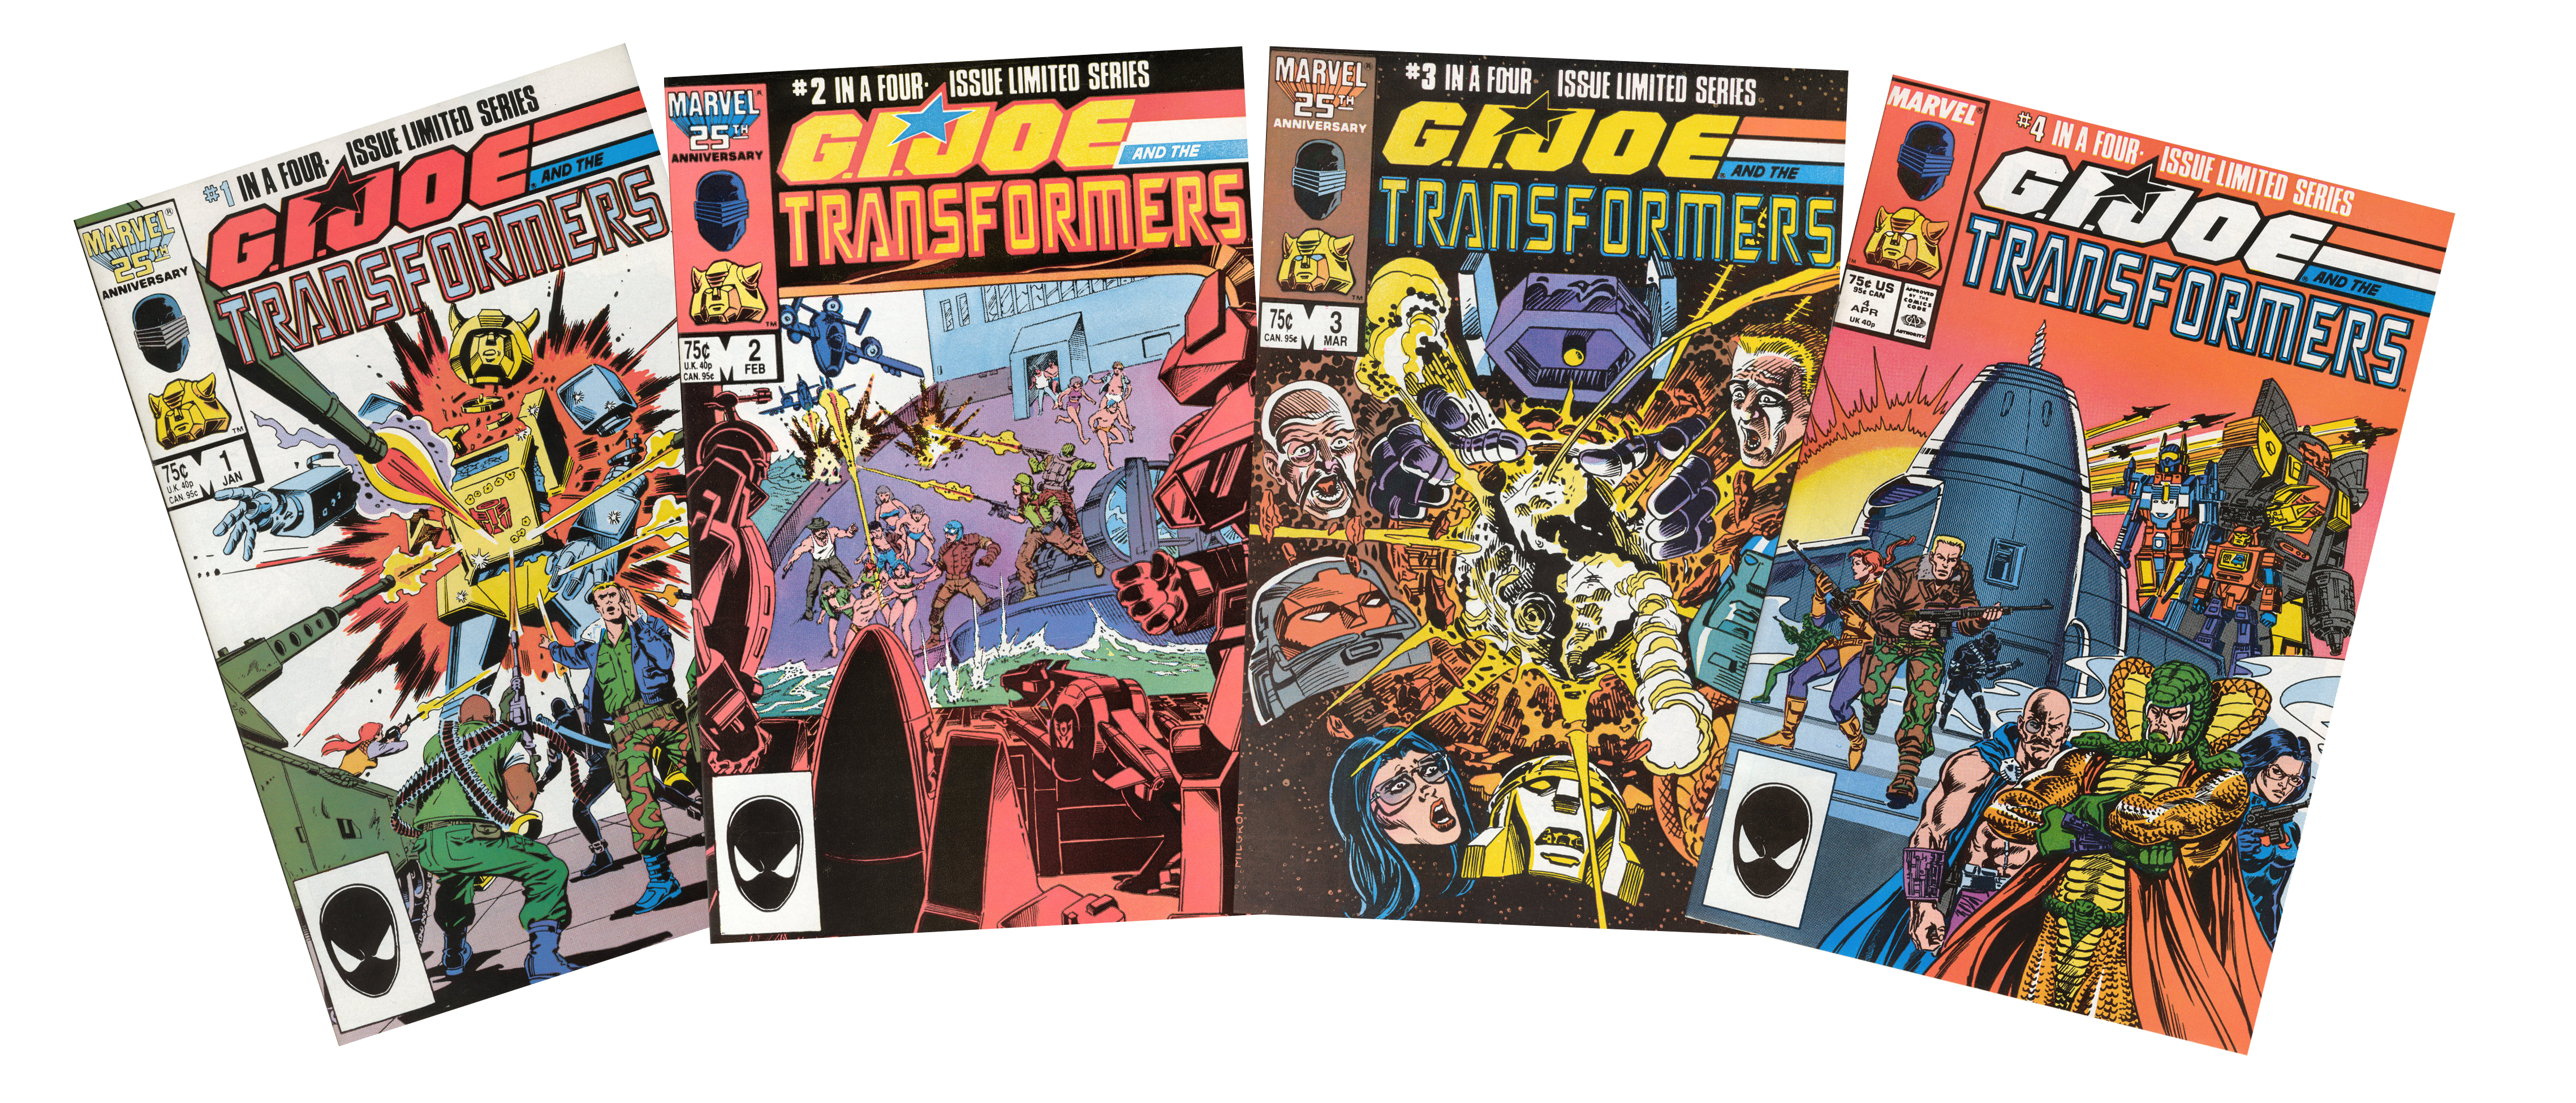 Transformers & . Joe, finally the shared universe I always dreamed of… |  Branded in the 80s